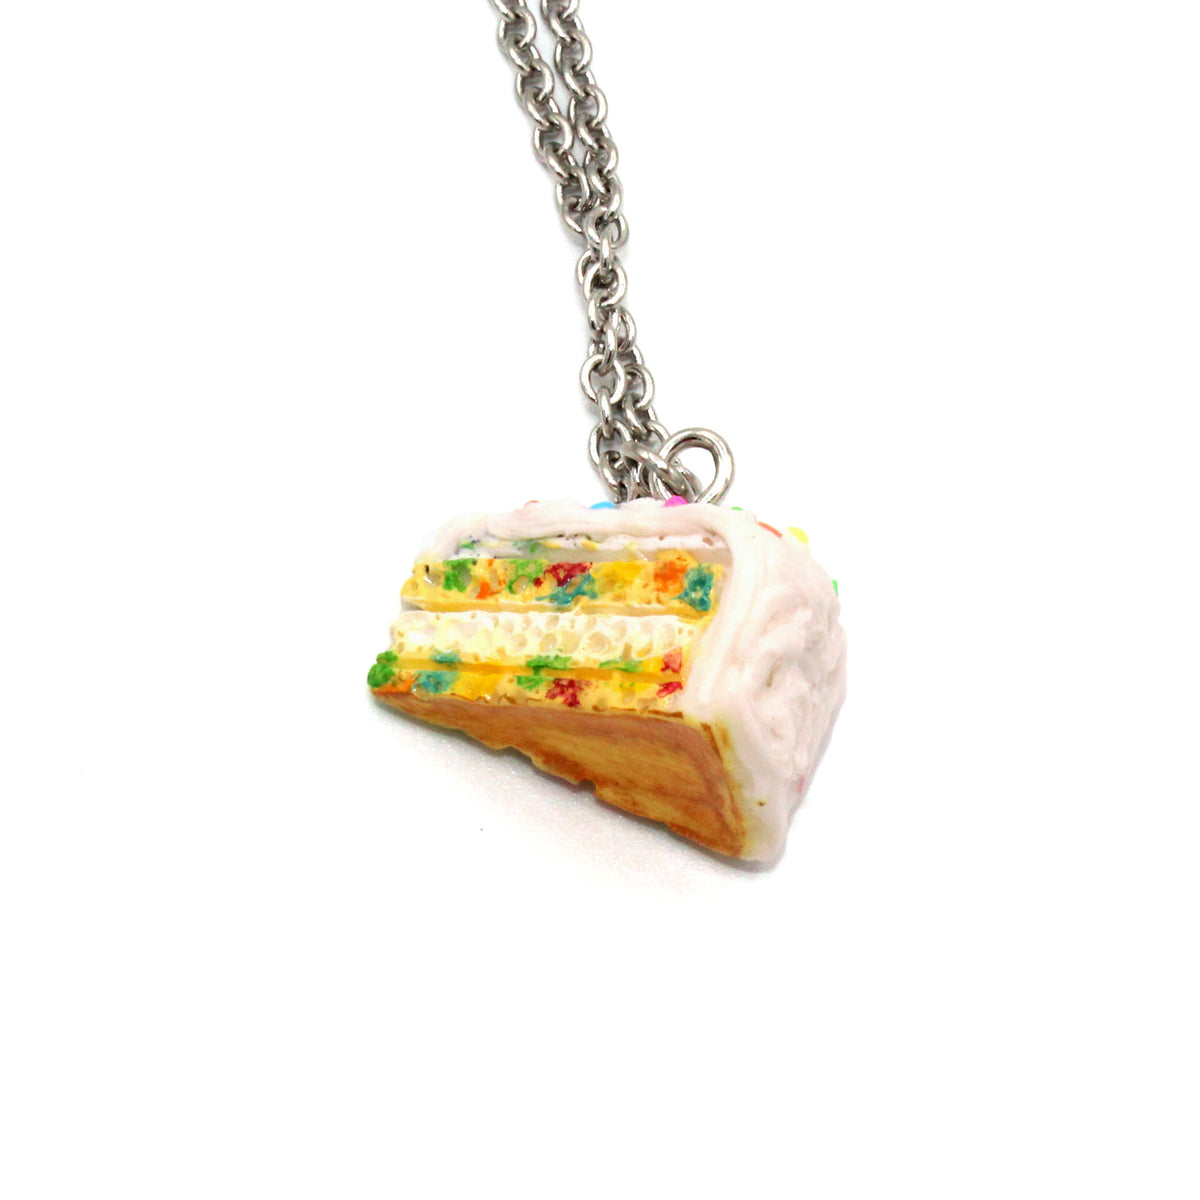  Realistic Chocolate Cake Charm Necklace